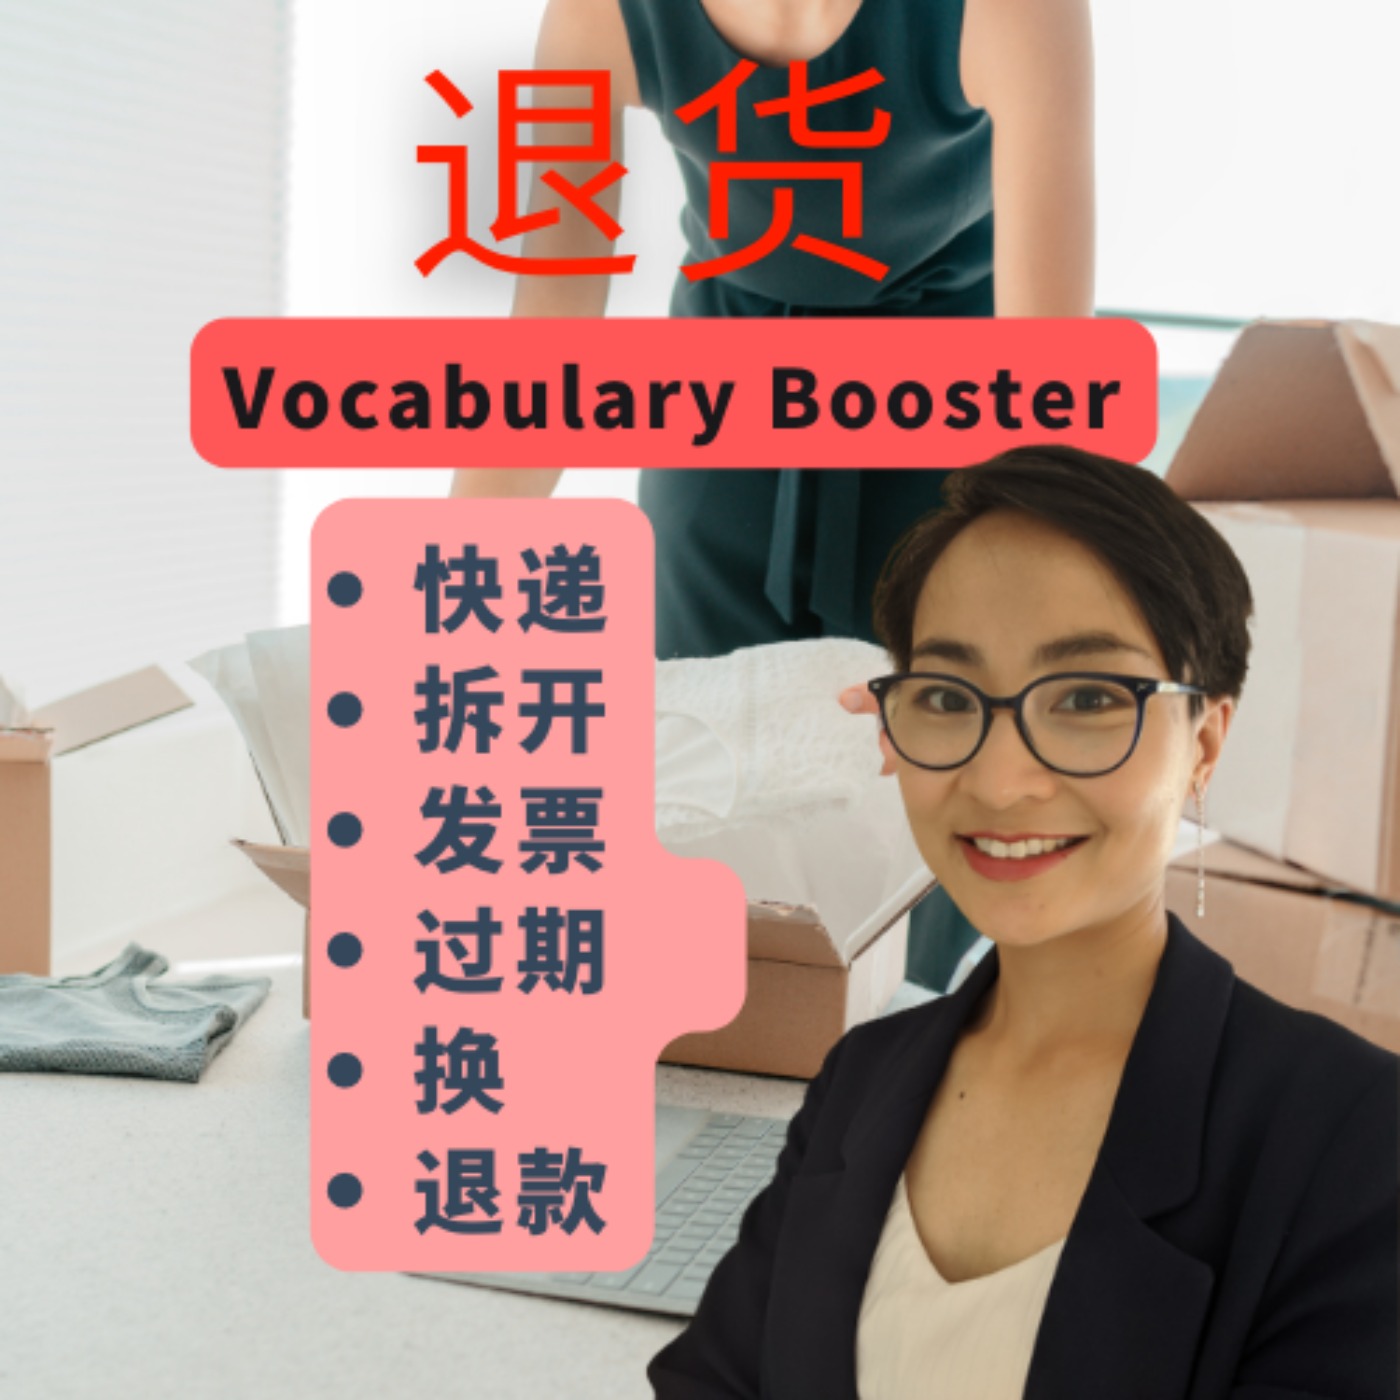 cover art for 中文词汇课程 - 退货 Product Return - Vocabulary Booster